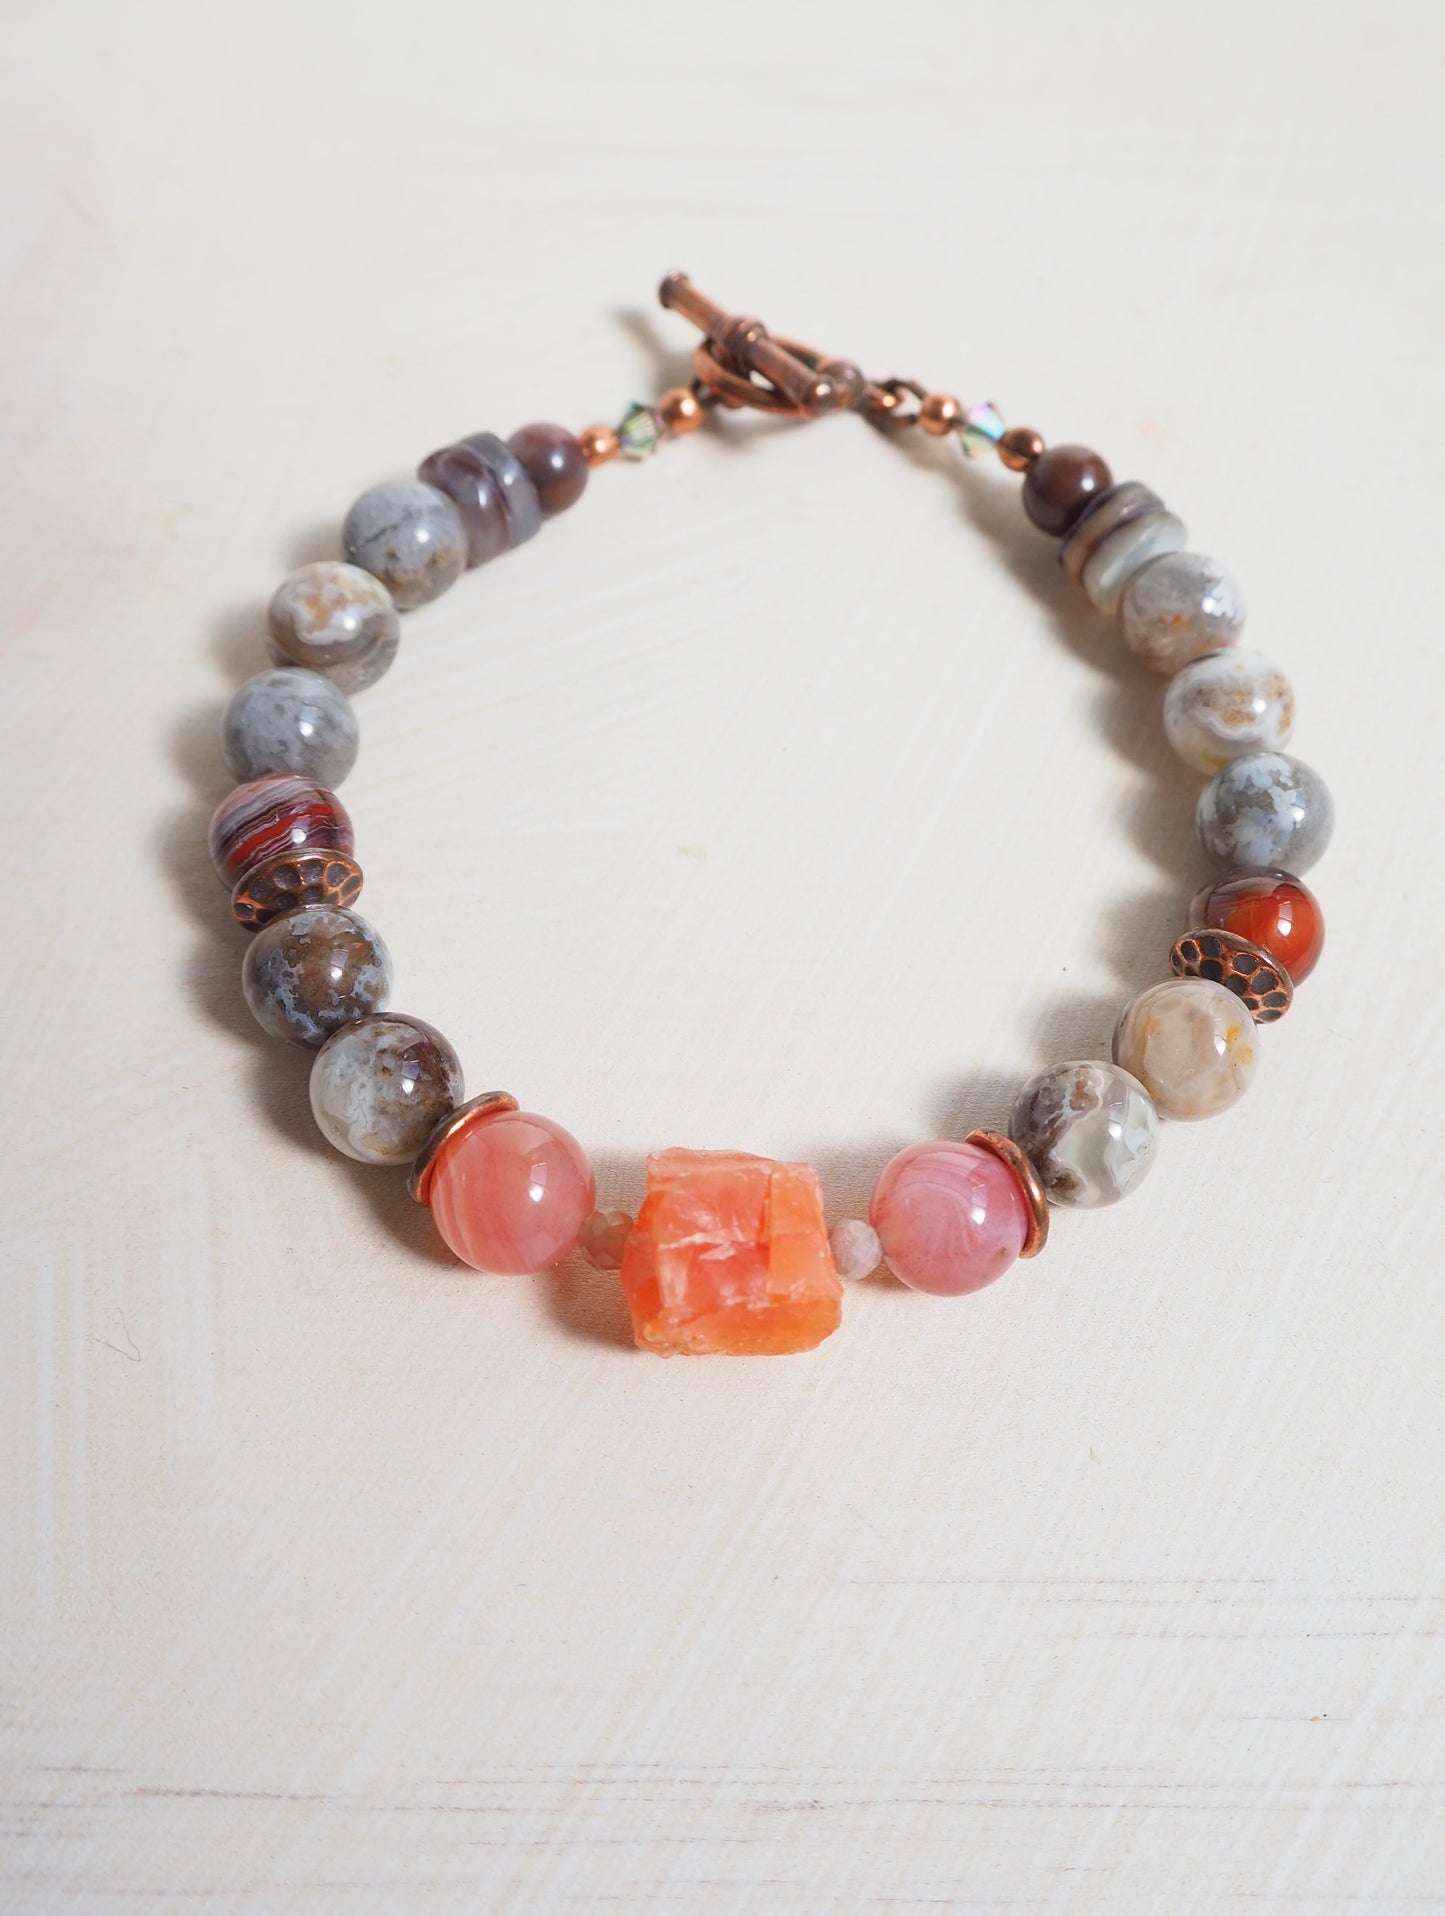 Agate & Tourmaline Bracelet with Red Agate Nugget and Copper Accents